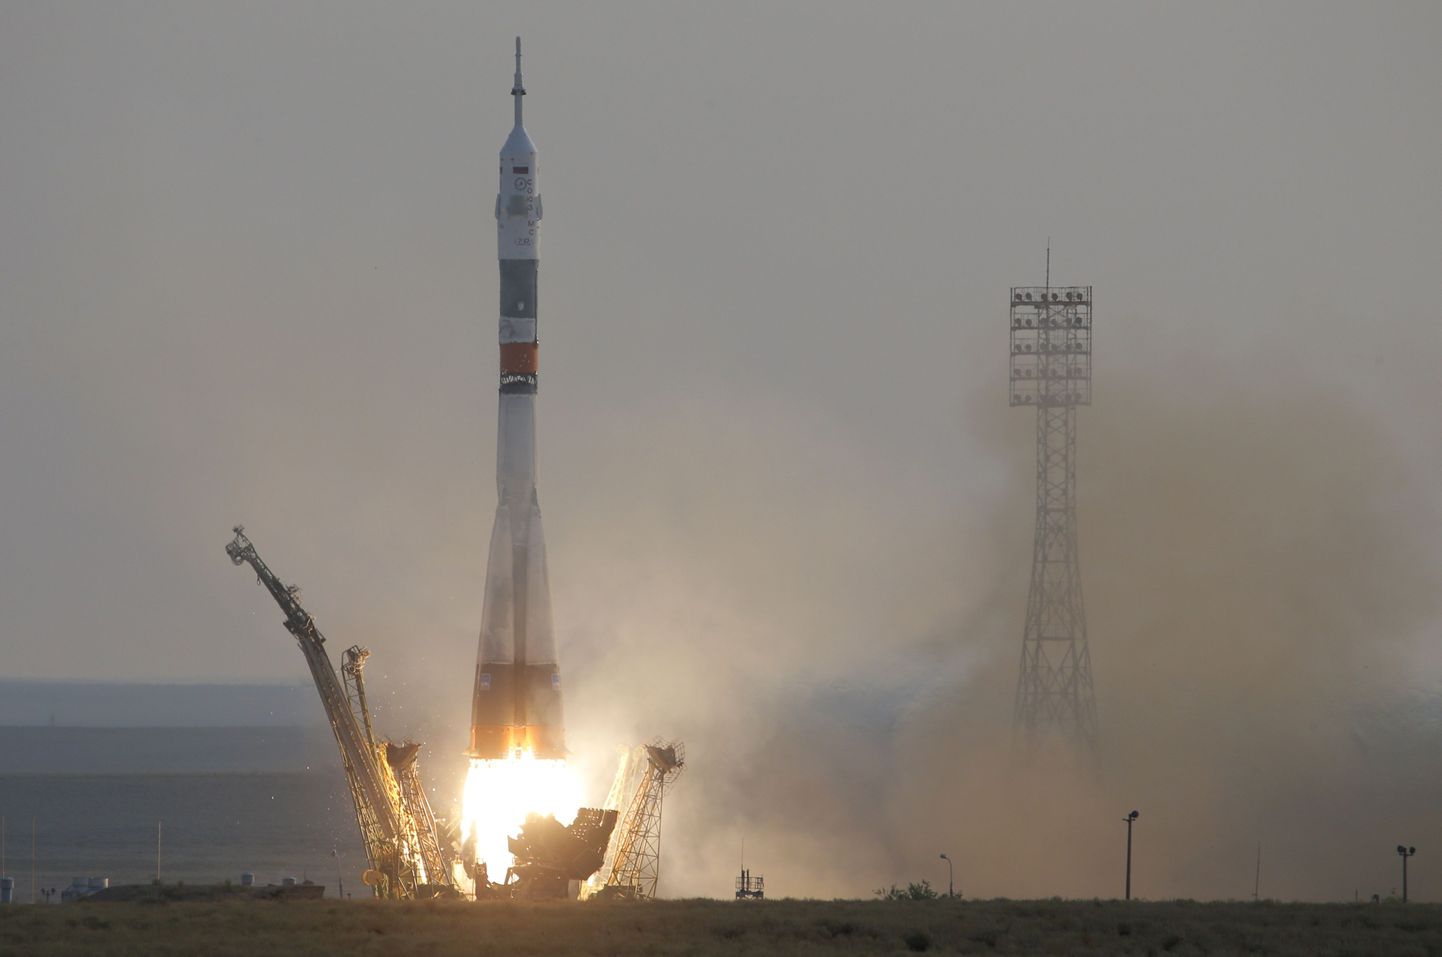 The Soyuz-FG rocket booster with Soyuz MS space ship carrying a new crew to the International Space Station, ISS, blasts off at the Russian leased Baikonur cosmodrome, Kazakhstan, Thursday, July 7, 2016. The Russian rocket carried U.S. astronaut Kate Rubins, Russian cosmonaut Anatoly Ivanishin, and Japanese astronaut Takuya Onishi. (AP Photo/Dmitri Lovetsky)